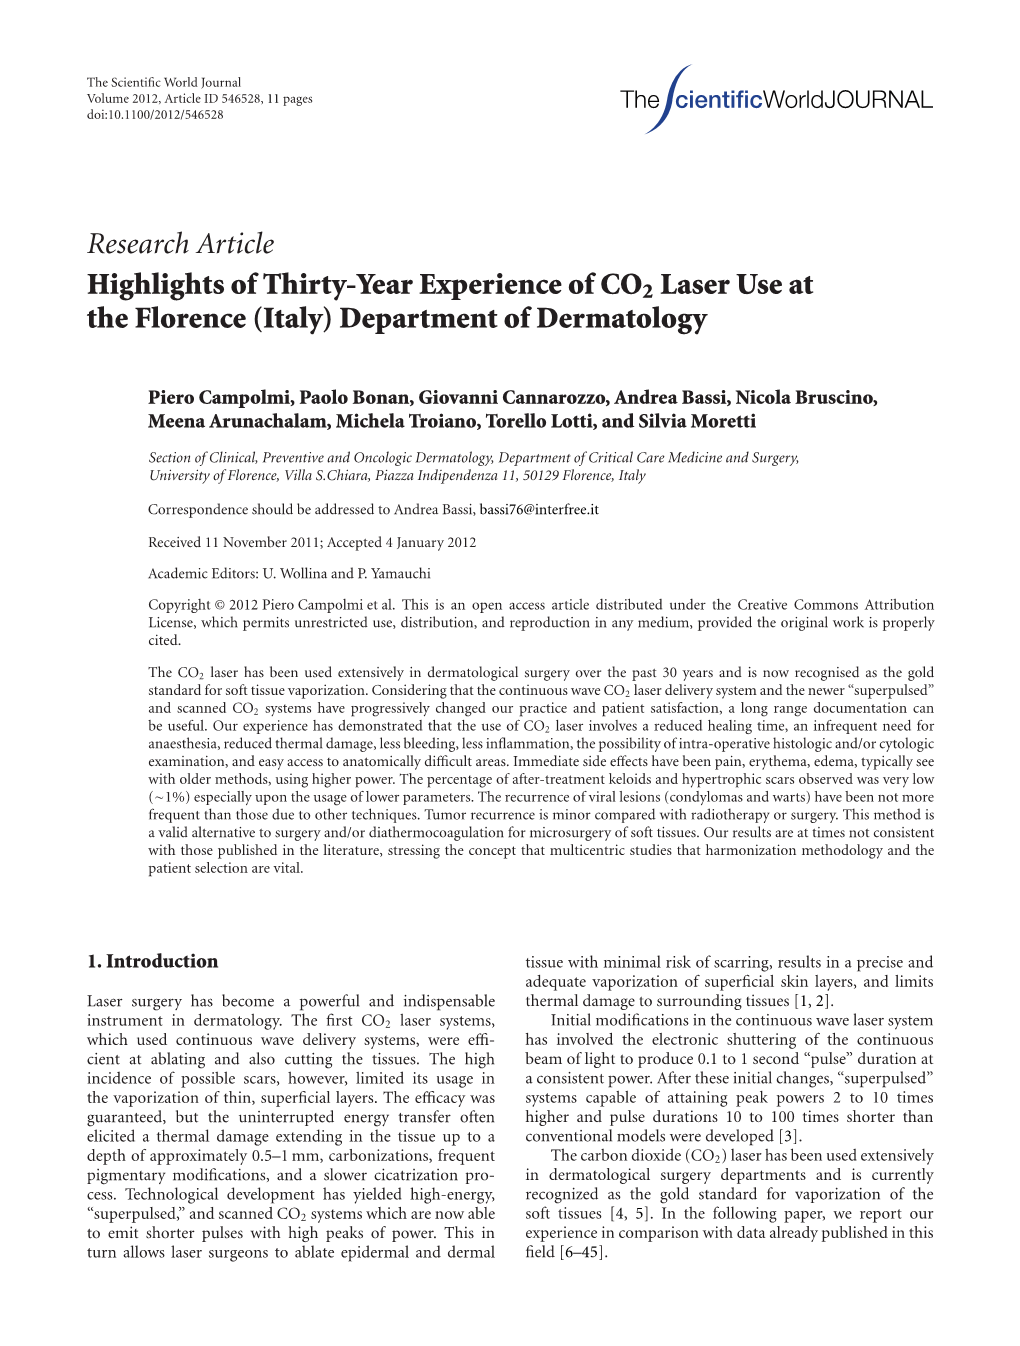 Research Article Highlights of Thirty-Year Experience of CO2 Laser Use at the Florence (Italy) Department of Dermatology